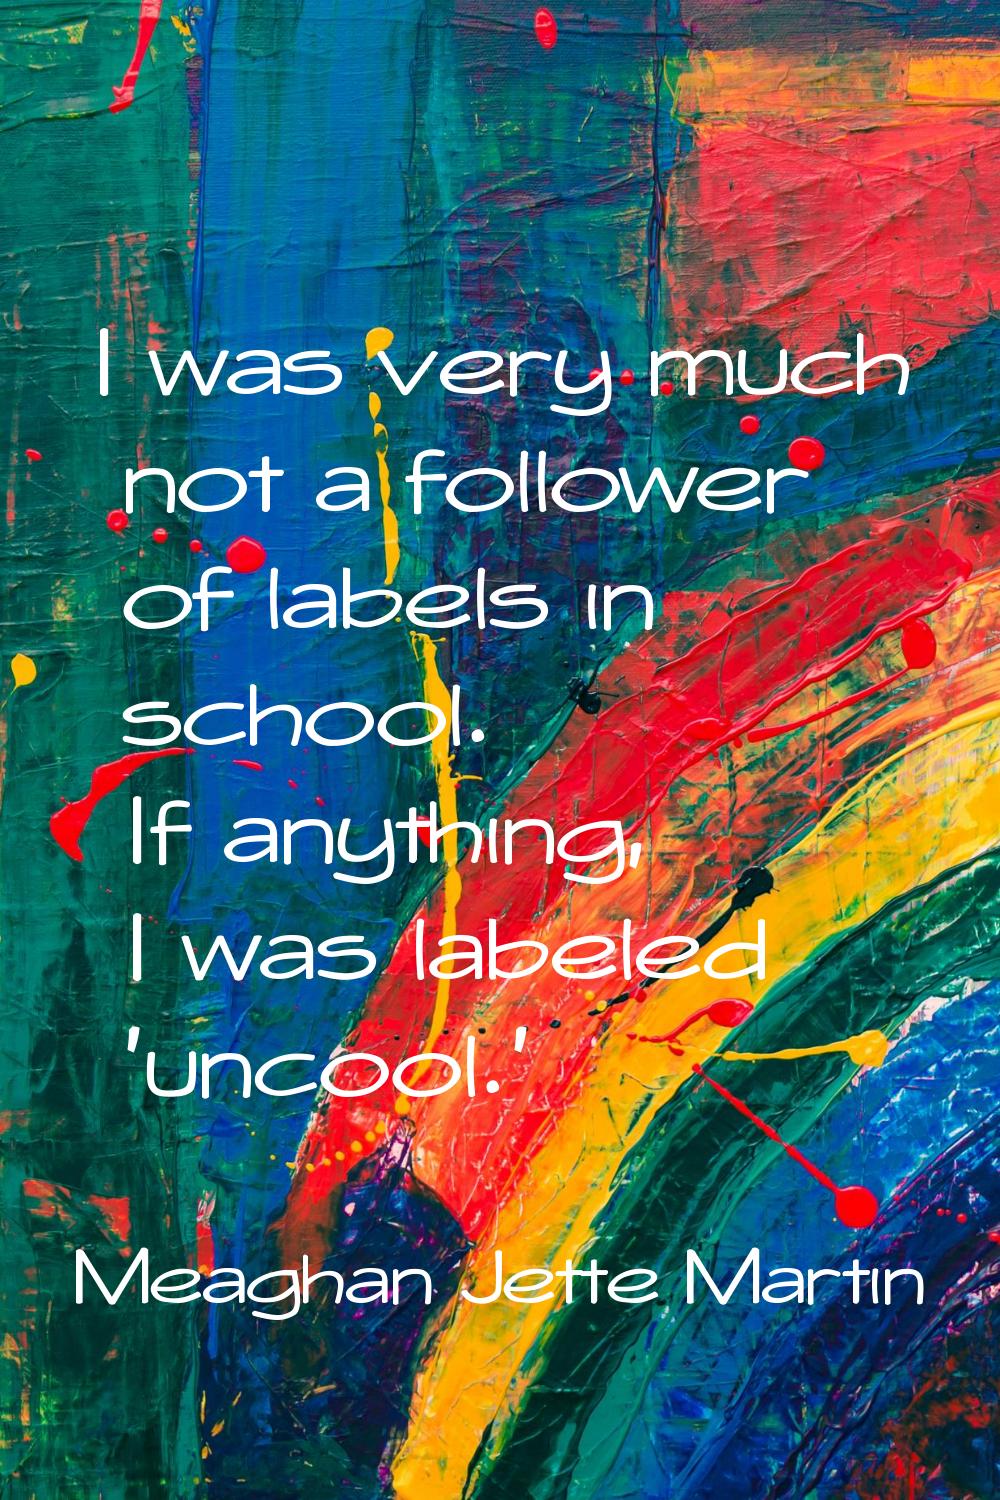 I was very much not a follower of labels in school. If anything, I was labeled 'uncool.'